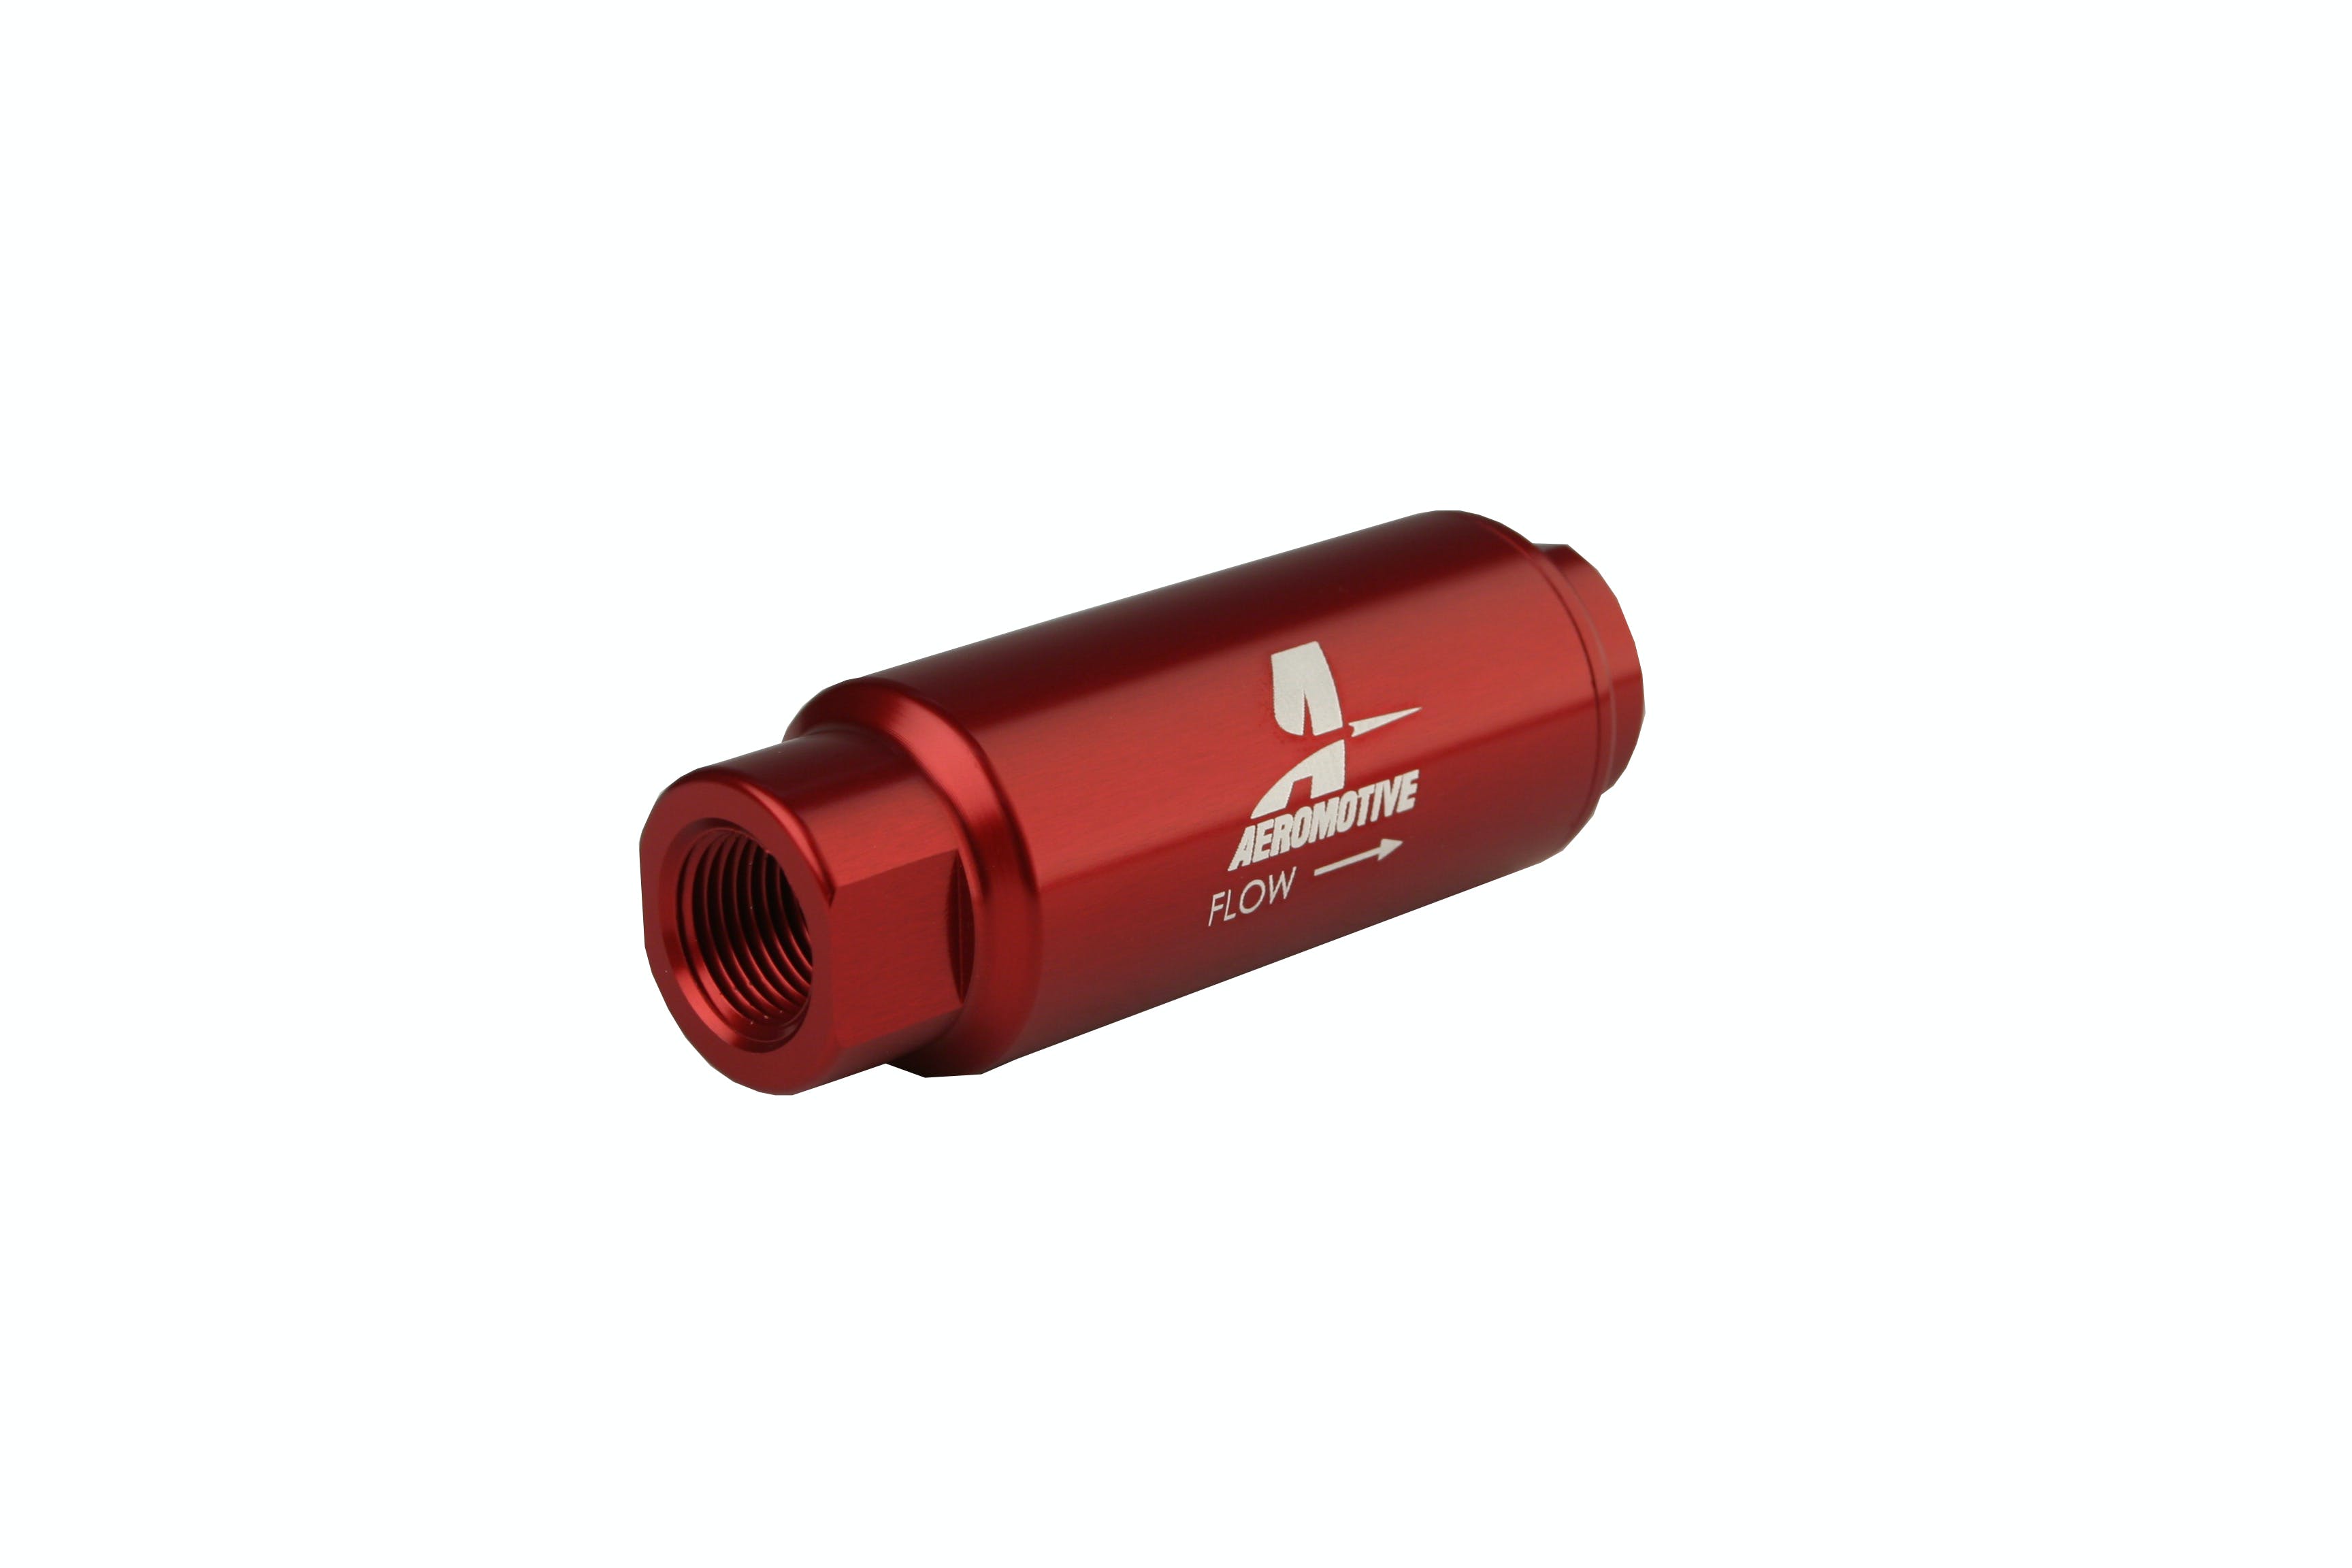 Aeromotive Fuel System 12303 SS Series In-Line Fuel Filter (3/8 inch NPT) 40 micron fabric element